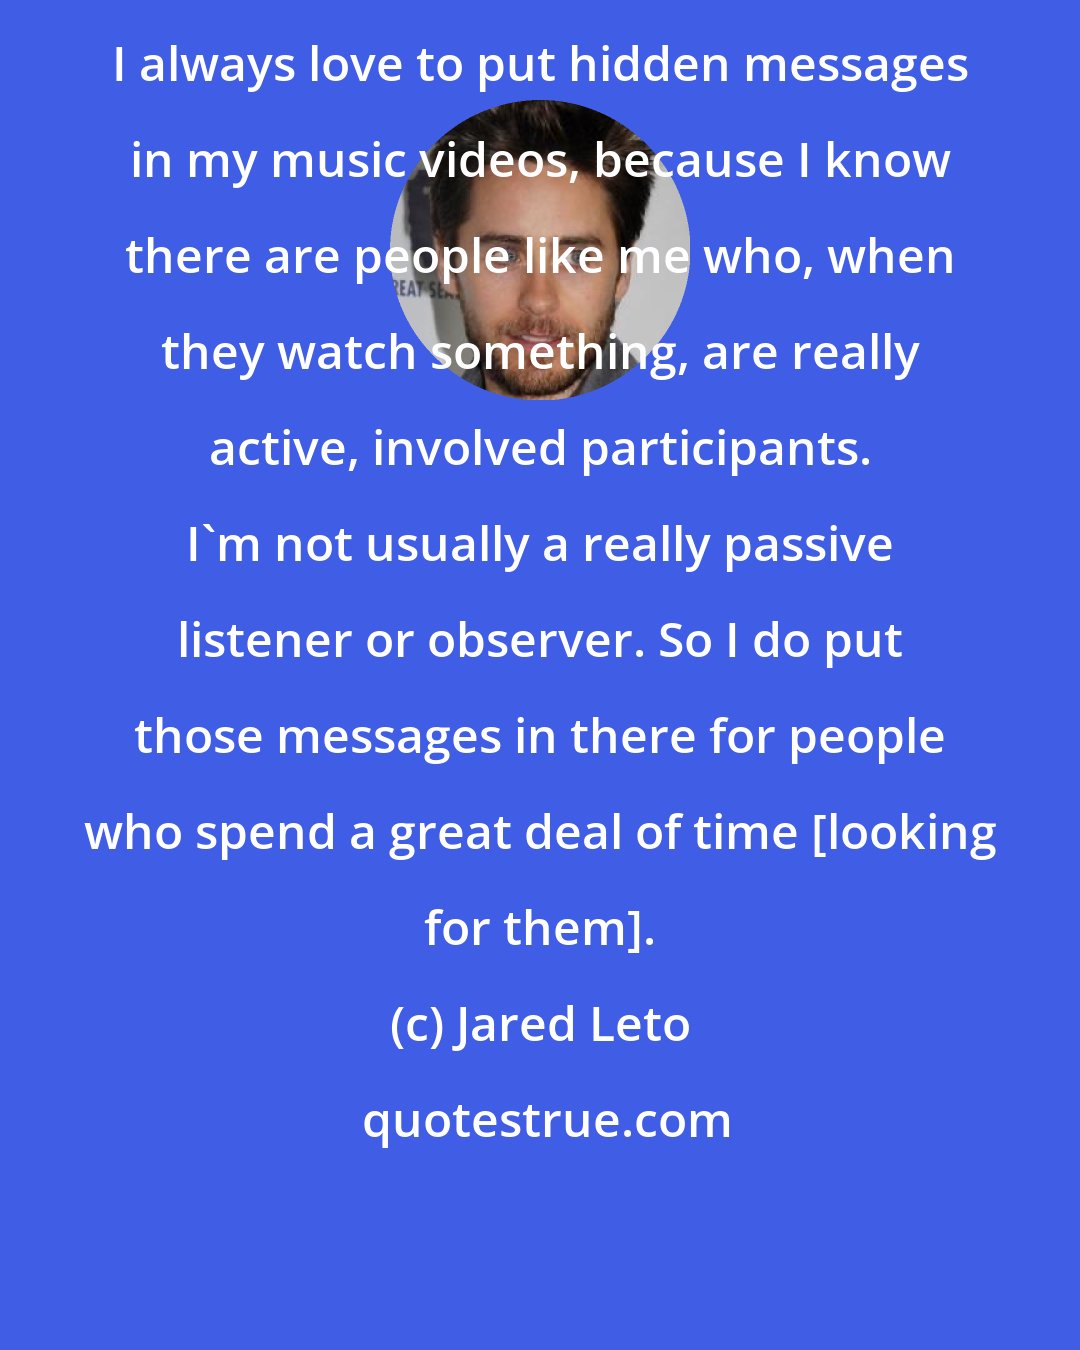 Jared Leto: I always love to put hidden messages in my music videos, because I know there are people like me who, when they watch something, are really active, involved participants. I'm not usually a really passive listener or observer. So I do put those messages in there for people who spend a great deal of time [looking for them].